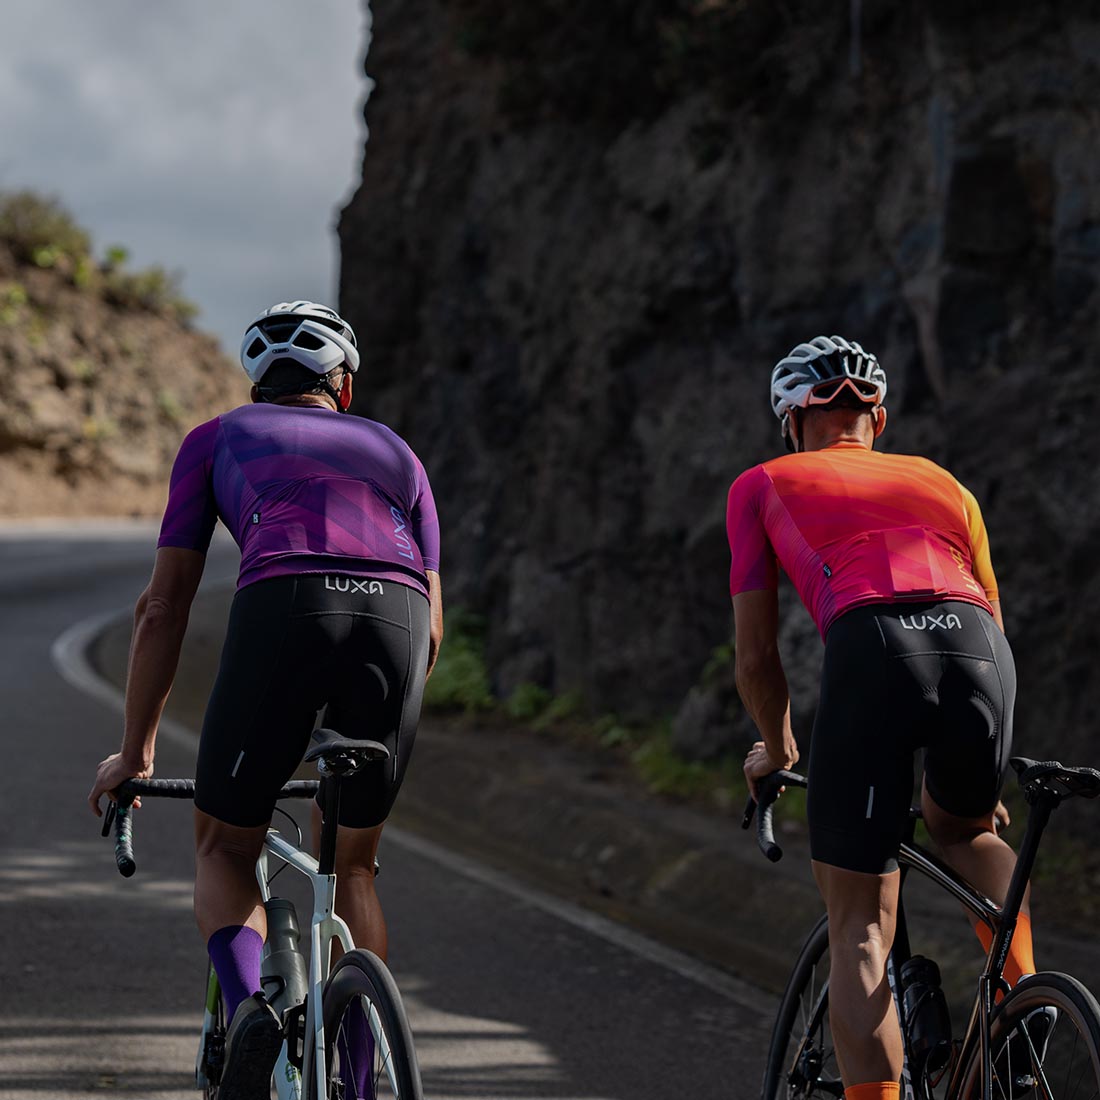 luxa cycling premium bib shorts and tights and two friends wearing Luxa bib shorts